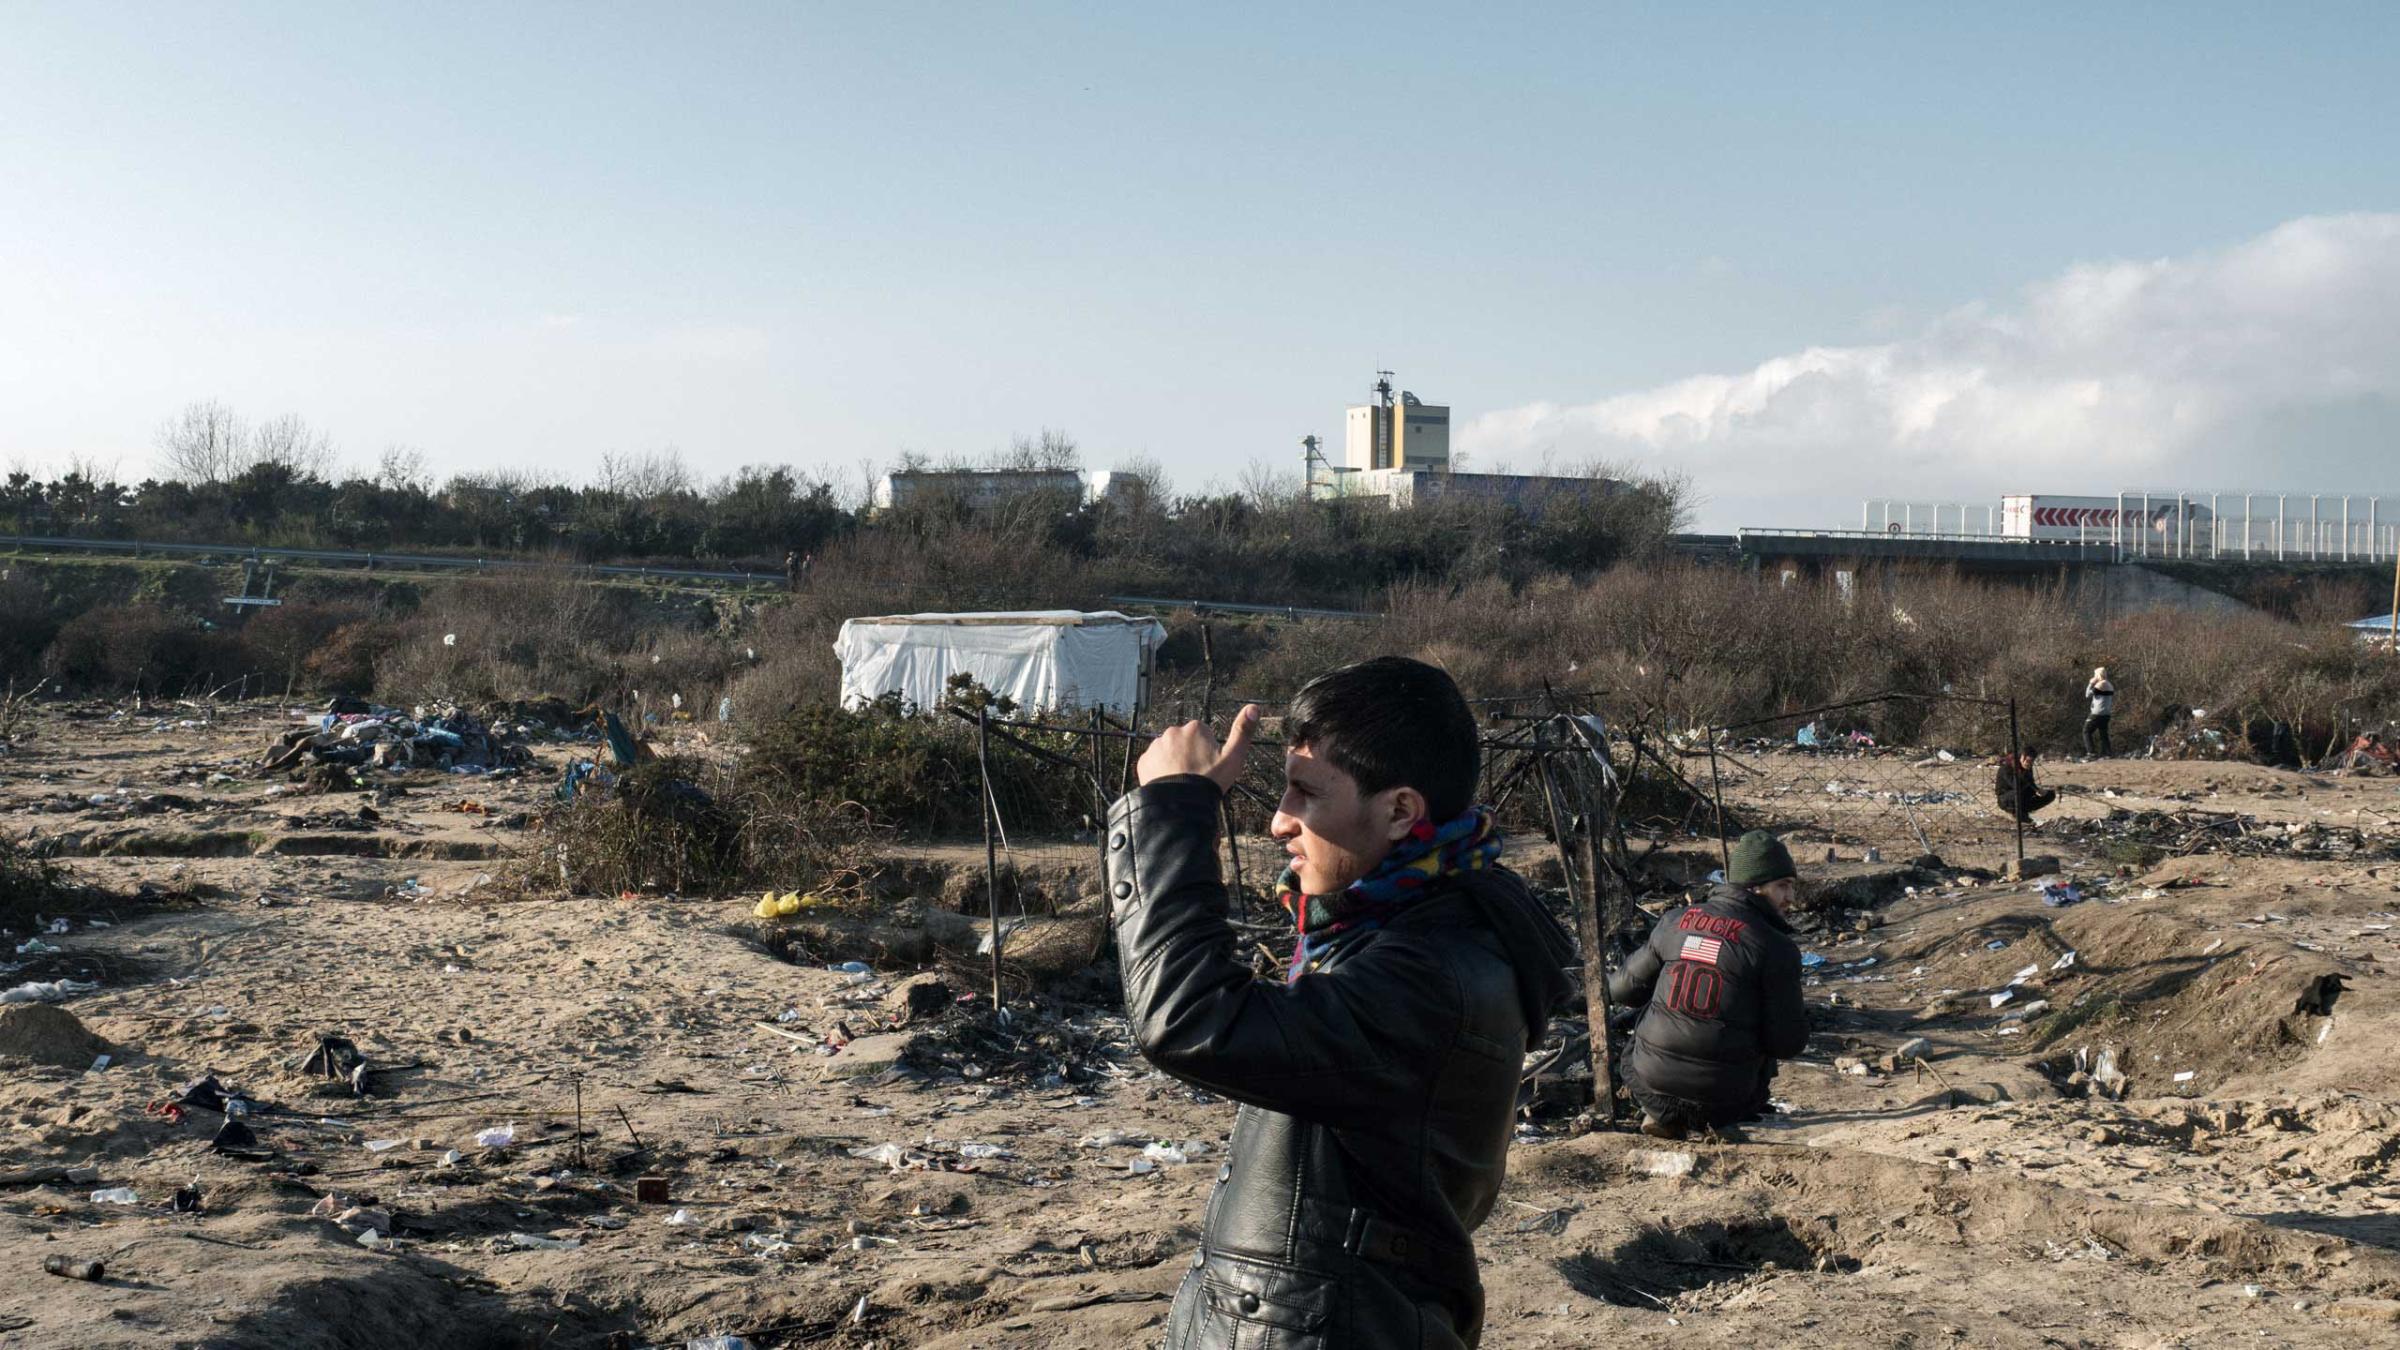 A young man looks out in an area in Calais, France that is being cleared for new housing containers, Jan. 20, 2016.